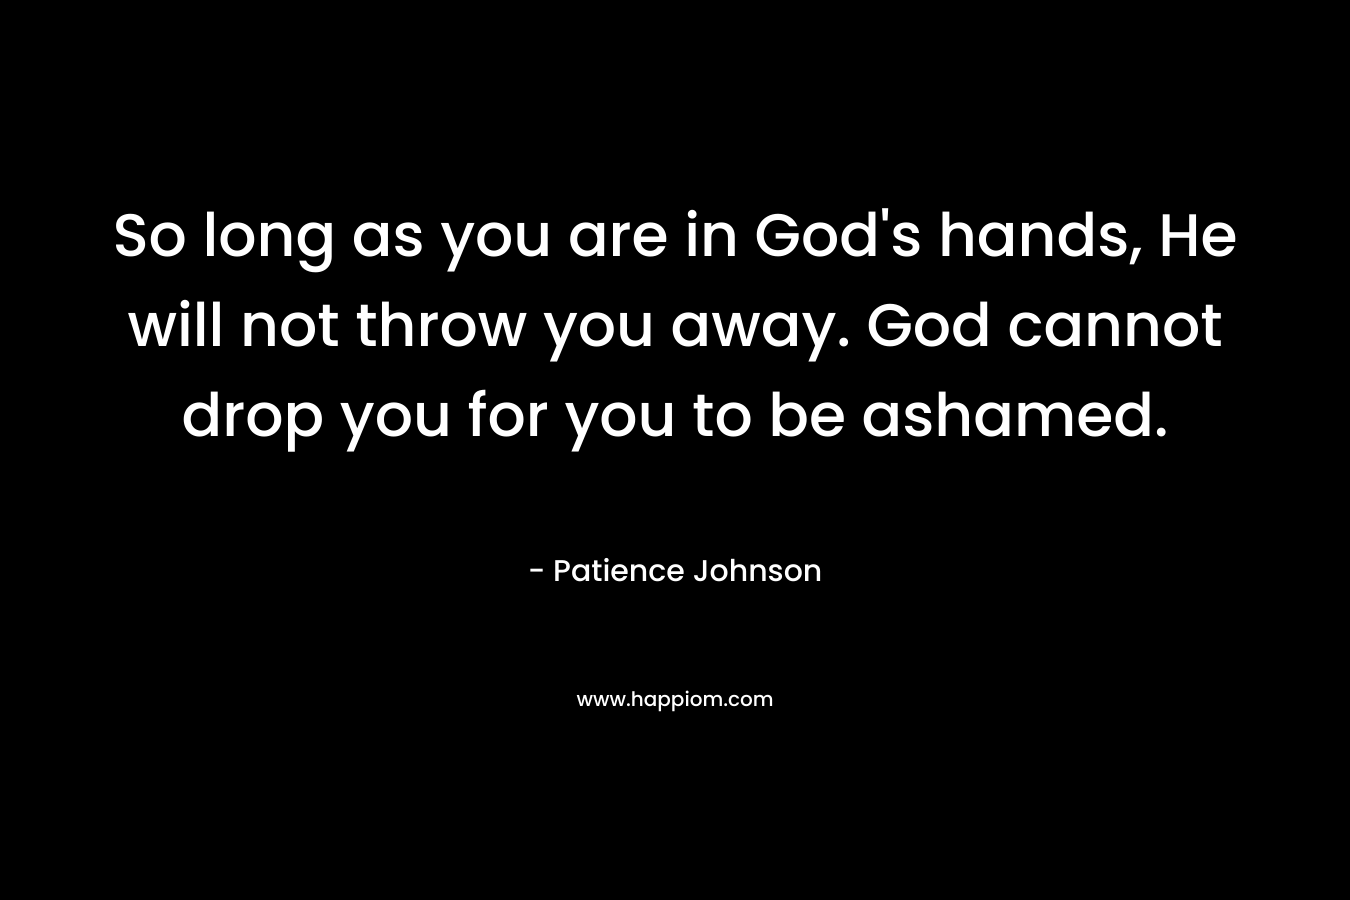 So long as you are in God's hands, He will not throw you away. God cannot drop you for you to be ashamed.